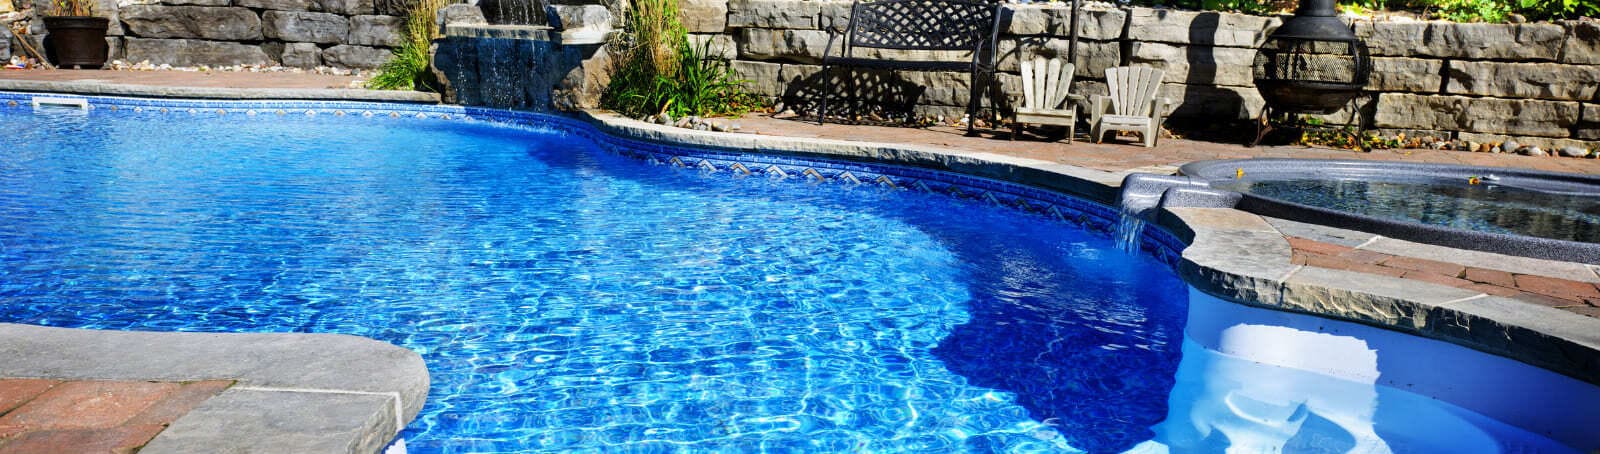 Dive into Financial Success: Managing Your Swimming Pool Business with Pimaccounting's Legal and Accounting Expertise